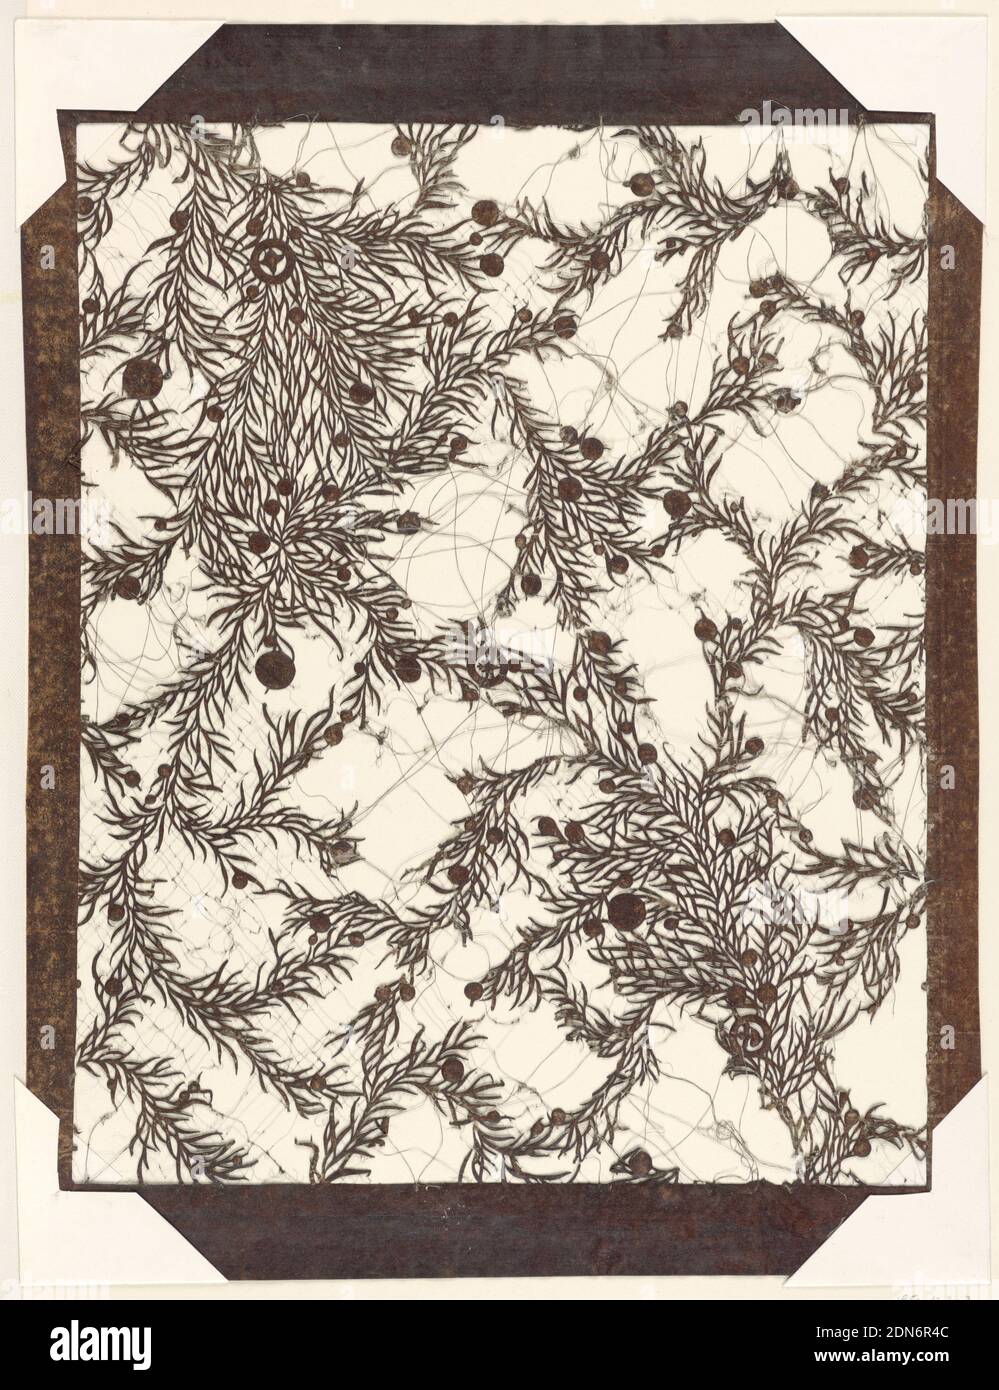 Juniper Leaves and Berries, Mulberry paper (kozo washi) treated with fermented persimmon tannin (kakishibu), and silk threads (itoire), A design of clumps of juniper branches and leaves with scattered berries of varying sizes is created by cutting away most of the ground leaving the positive of the design. The interstices of the design are supported by silk thread., 1780–1830, textile designs, Katagami, Katagami Stock Photo